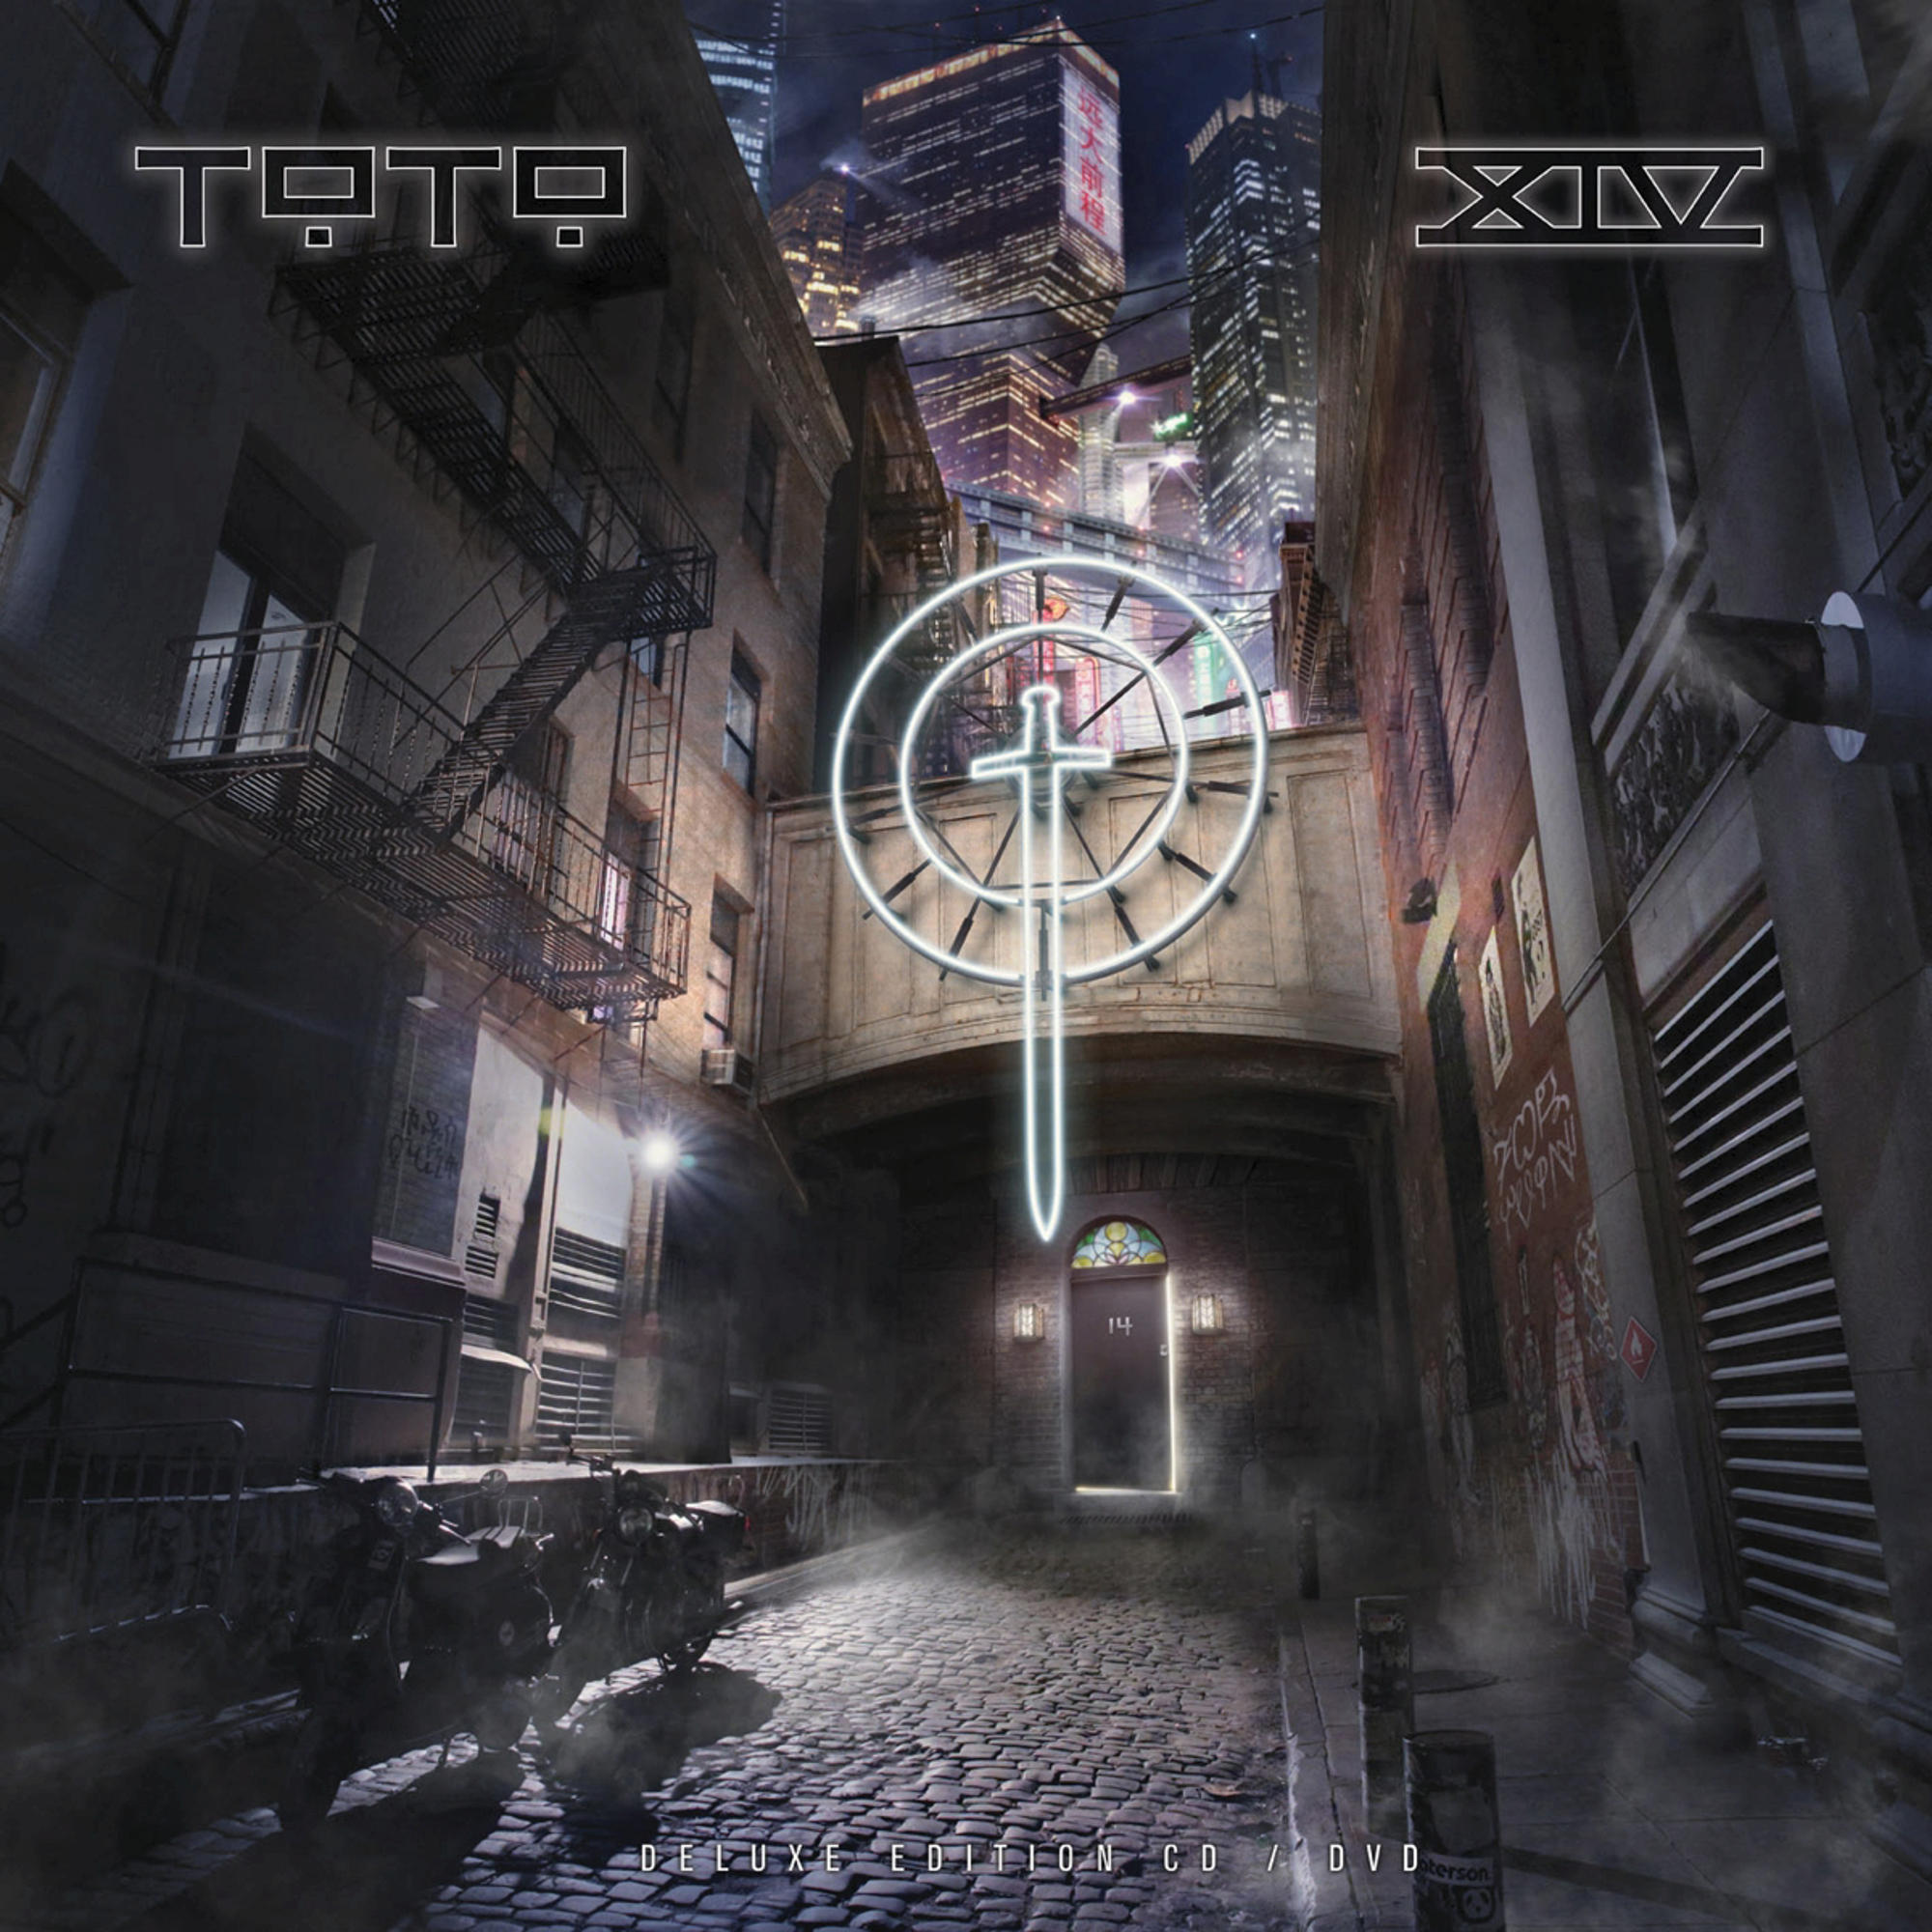 Toto - Toto XIV (Limited Video) DVD (CD - Edition) Ecolbook 